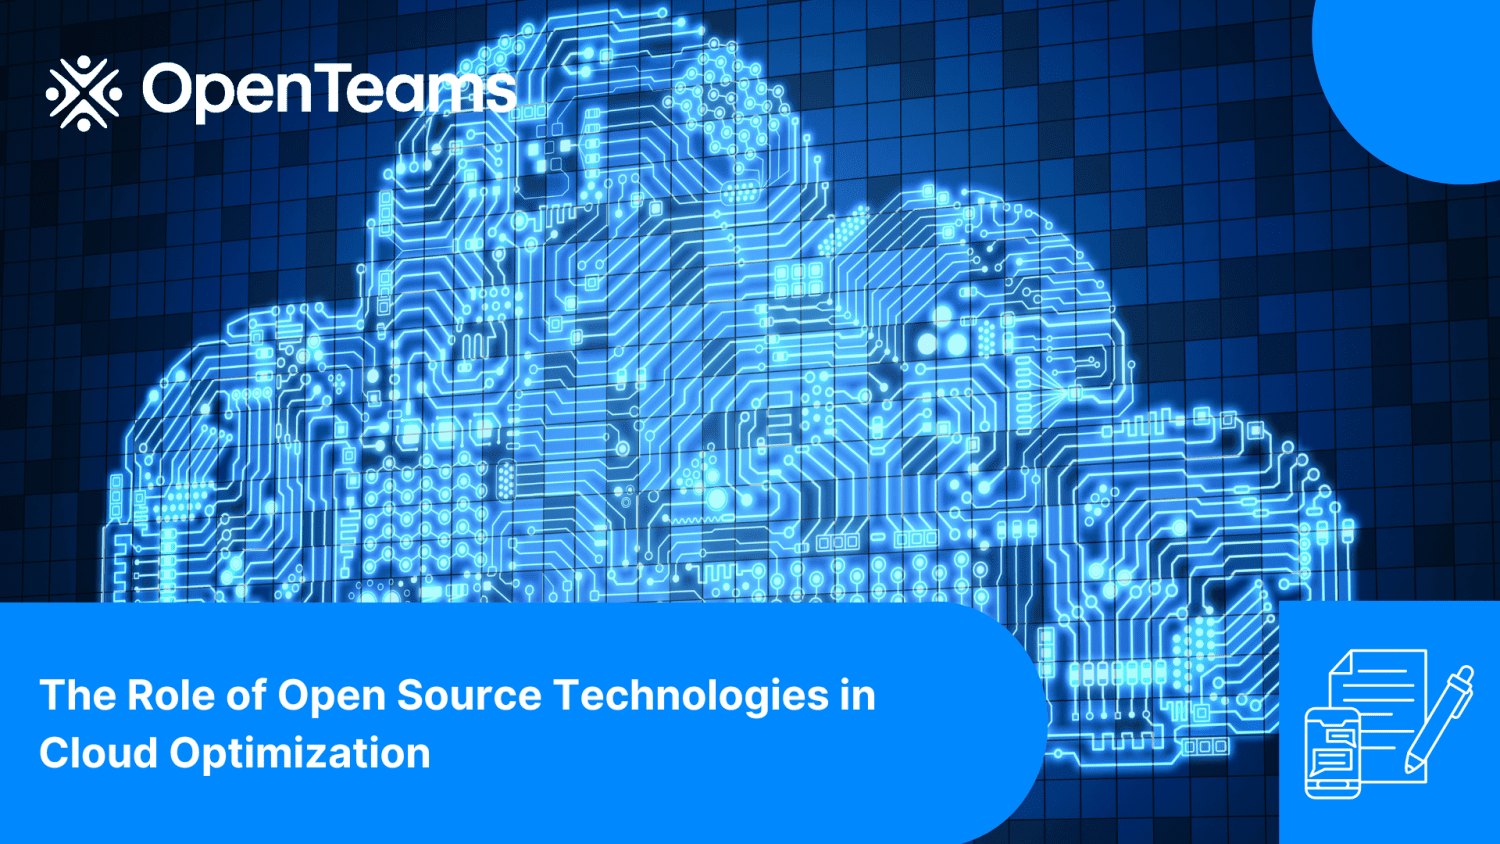 The Role of Open Source Technologies in Cloud Optimization